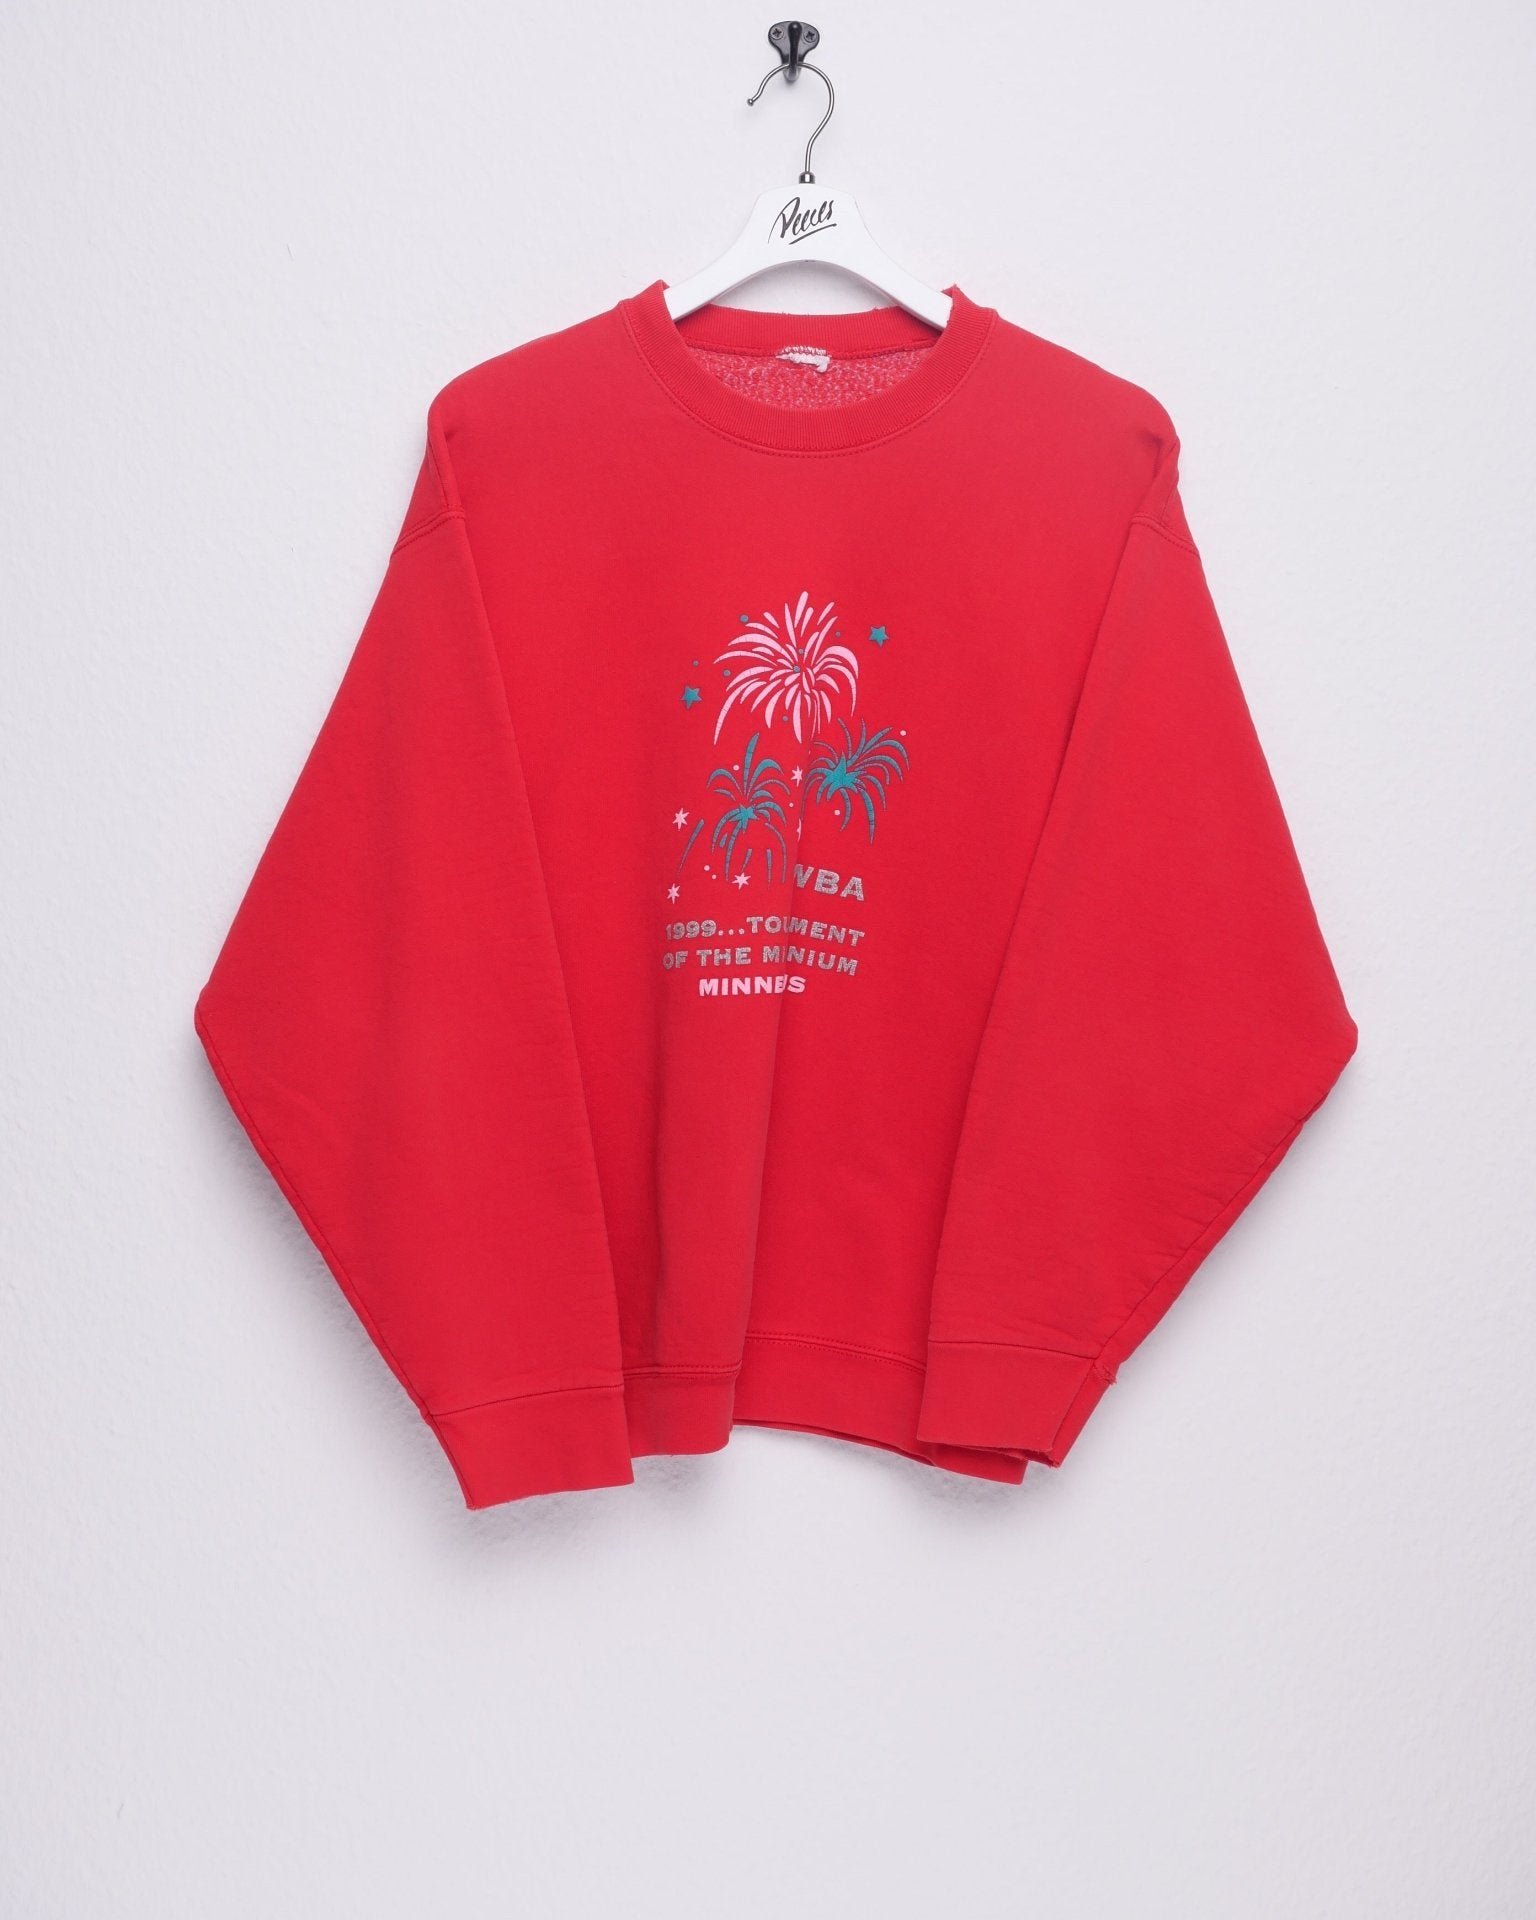 printed Graphic red Vintage Sweater - Peeces